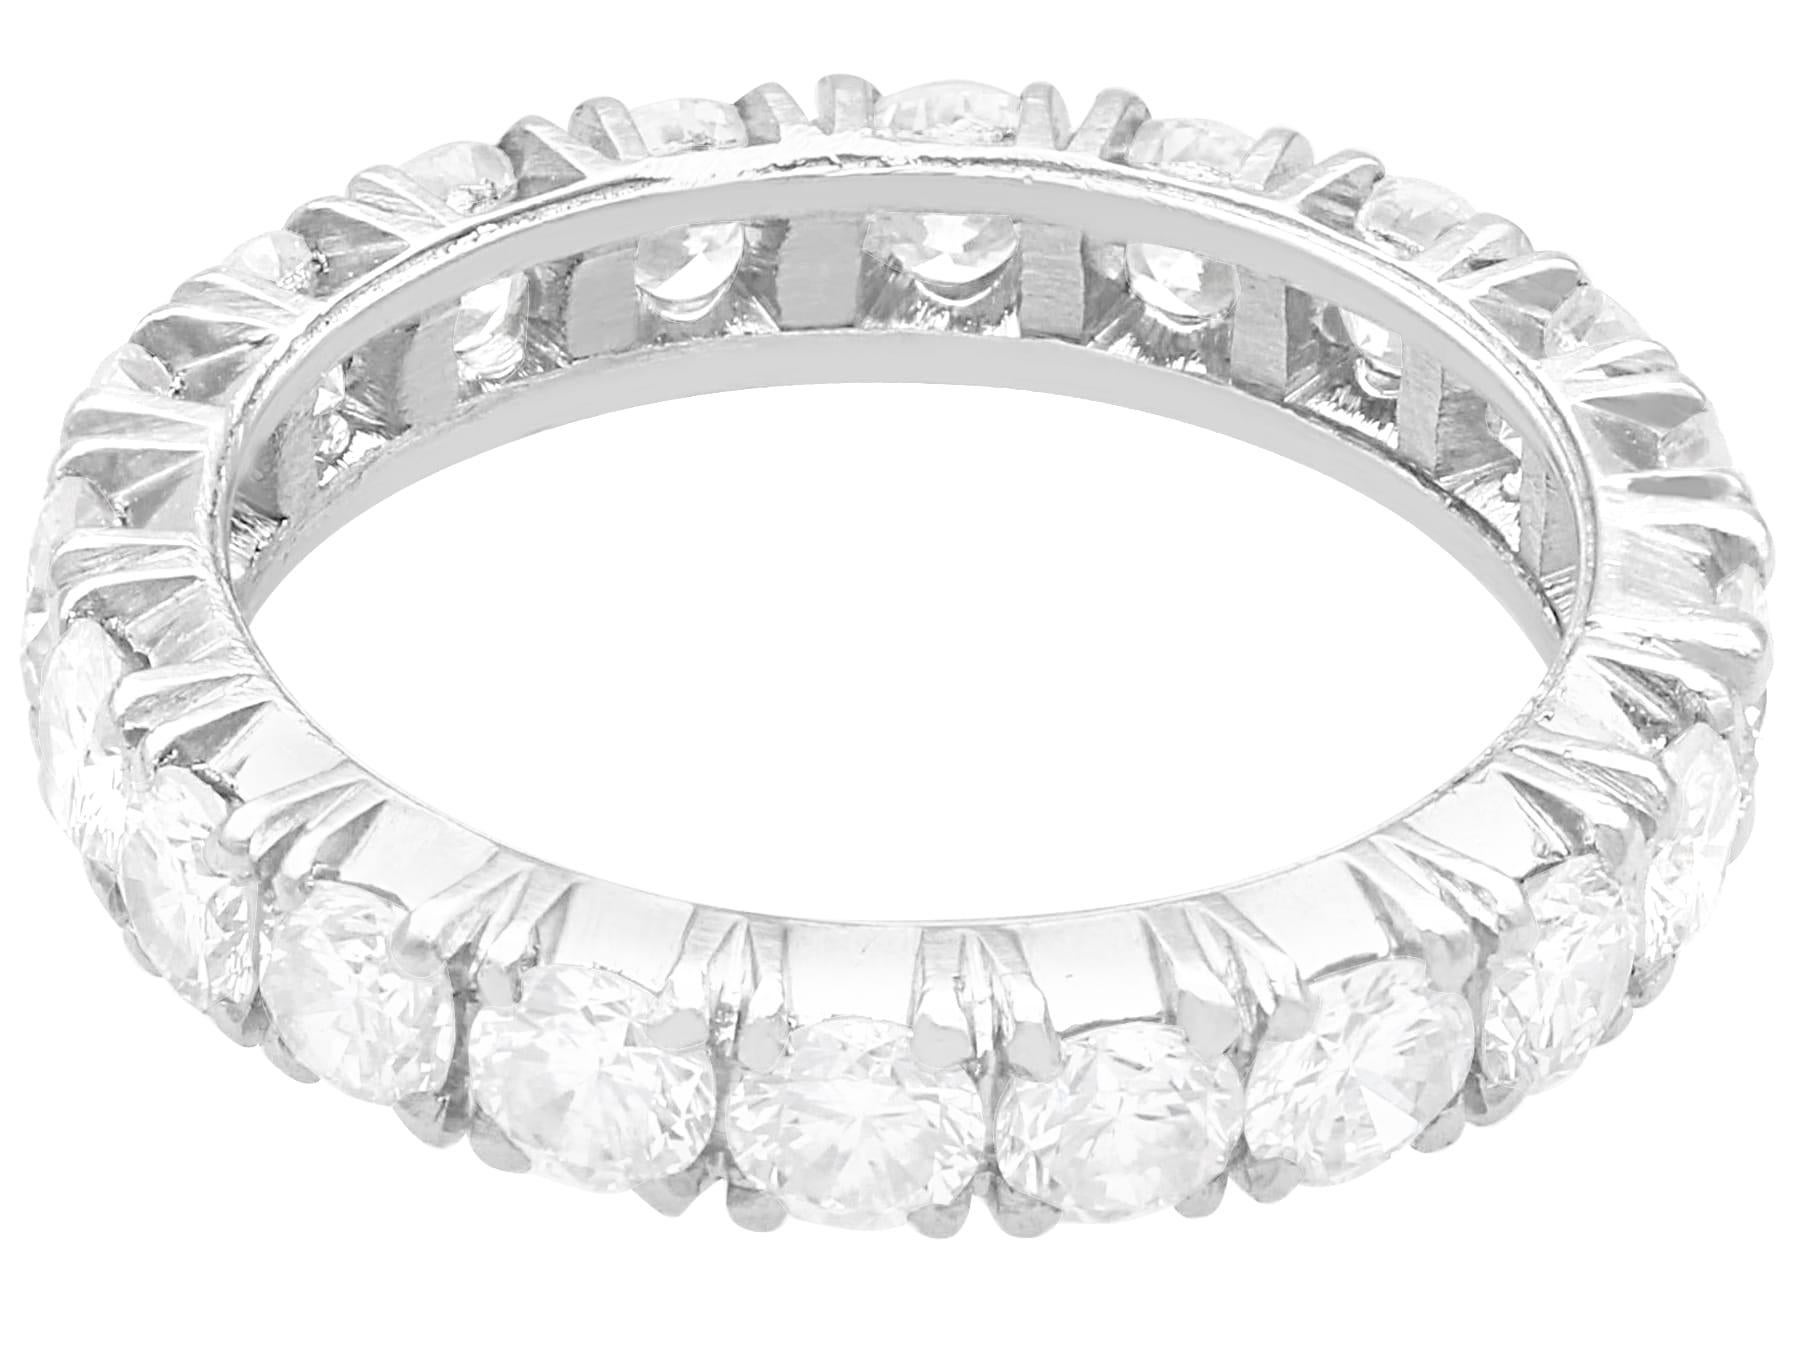 Vintage 1.80 Carat Diamond and Platinum Full Eternity Ring In Excellent Condition For Sale In Jesmond, Newcastle Upon Tyne